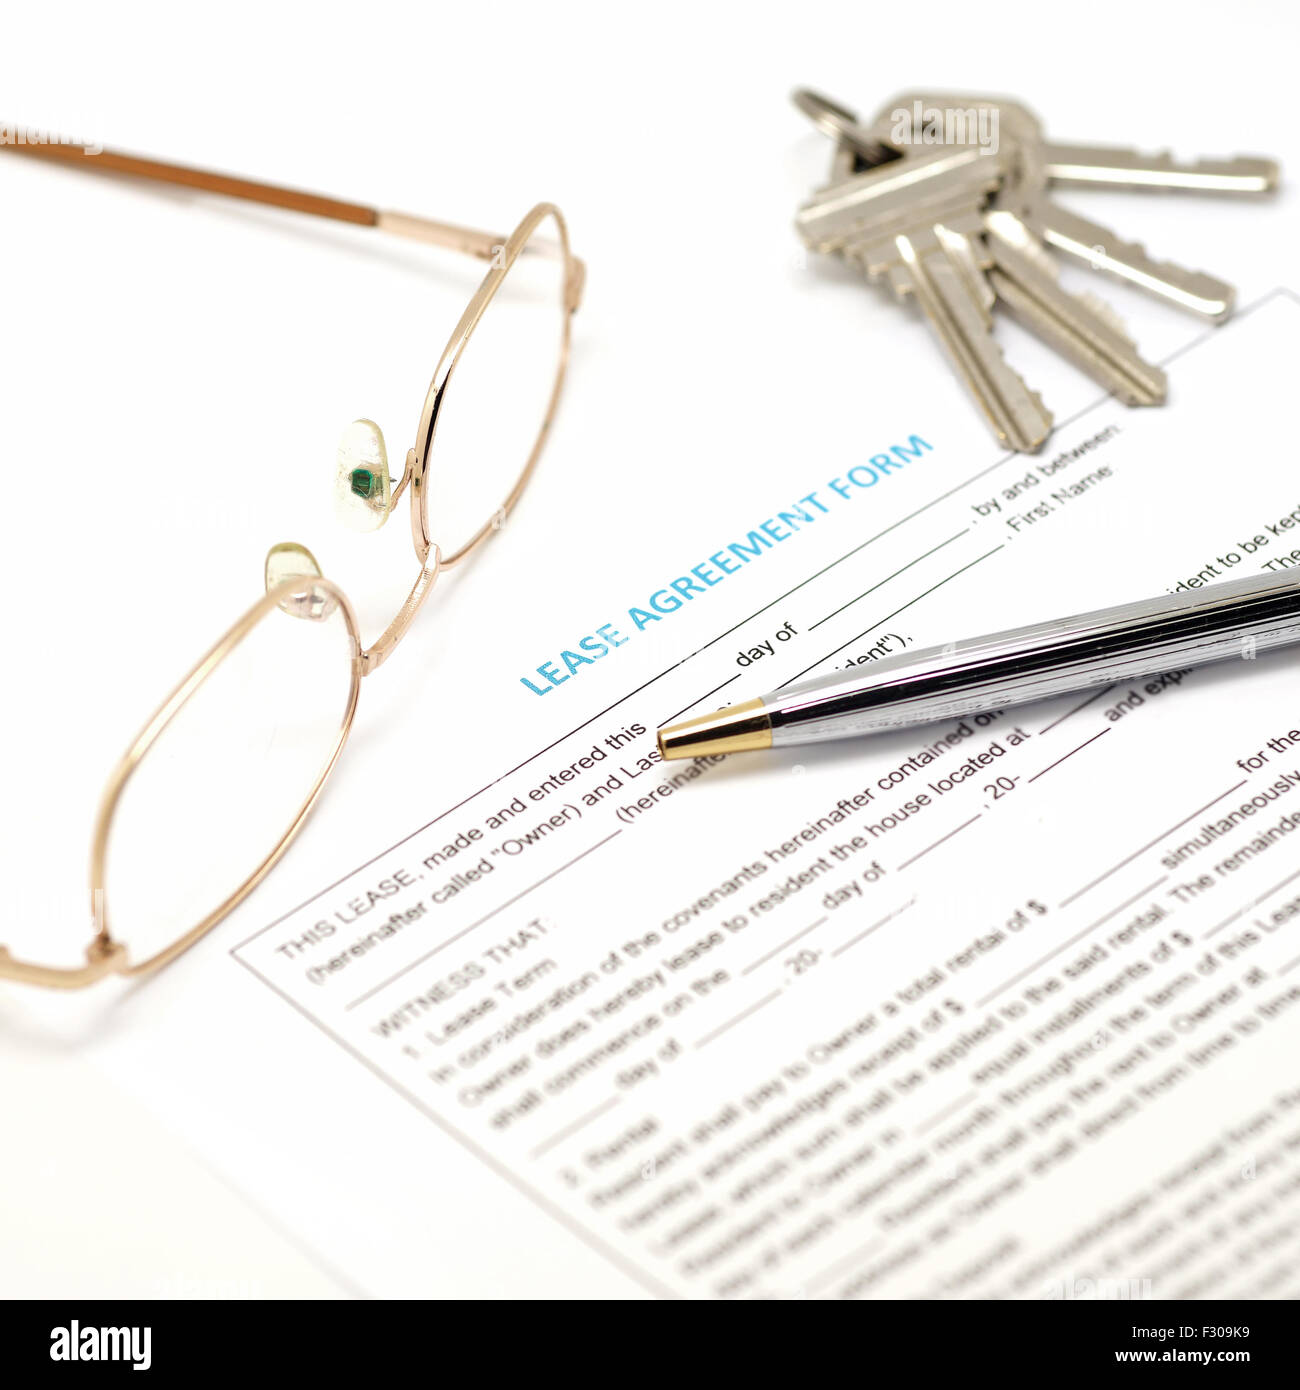 lease agreement document with key and pen Stock Photo